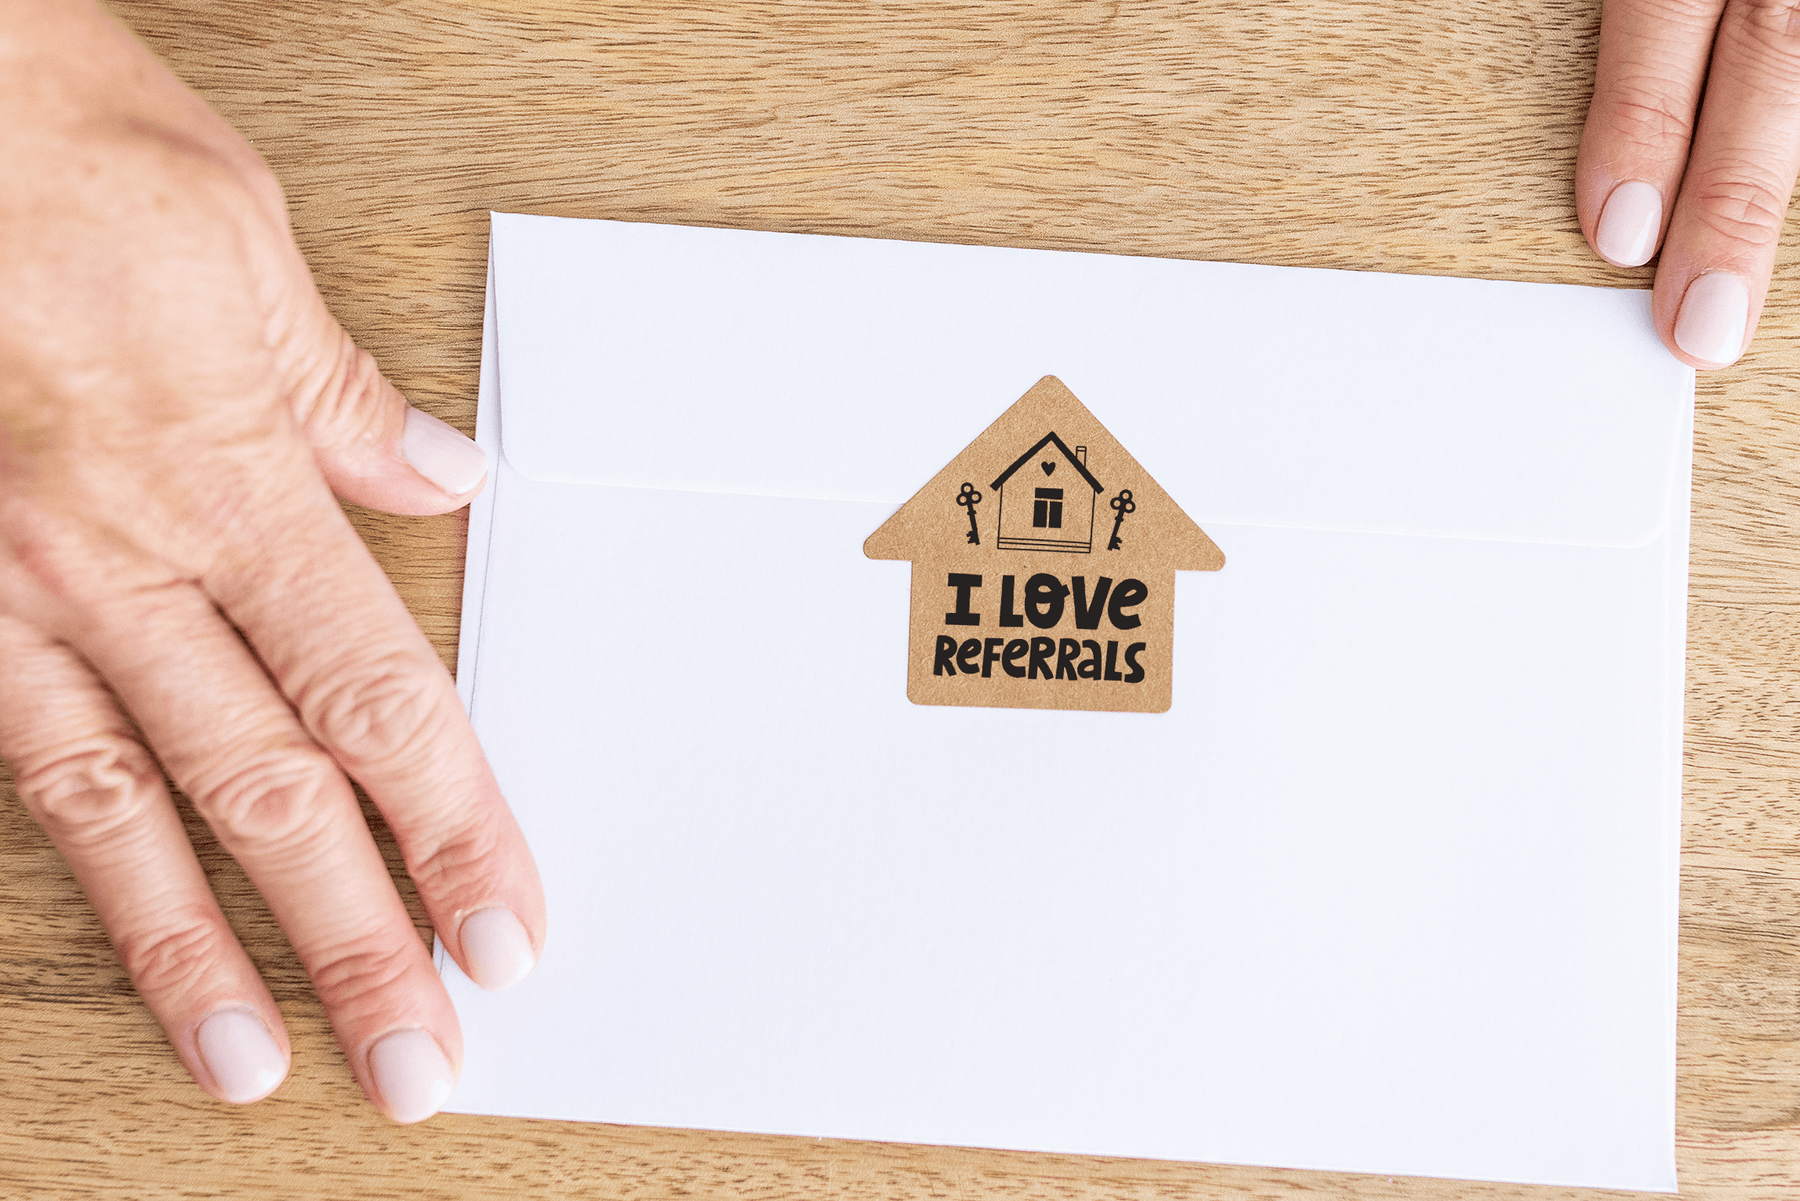 Our Popular I Love Referrals - Oval Gold Foil Sticker – Real Estate Supply  Store